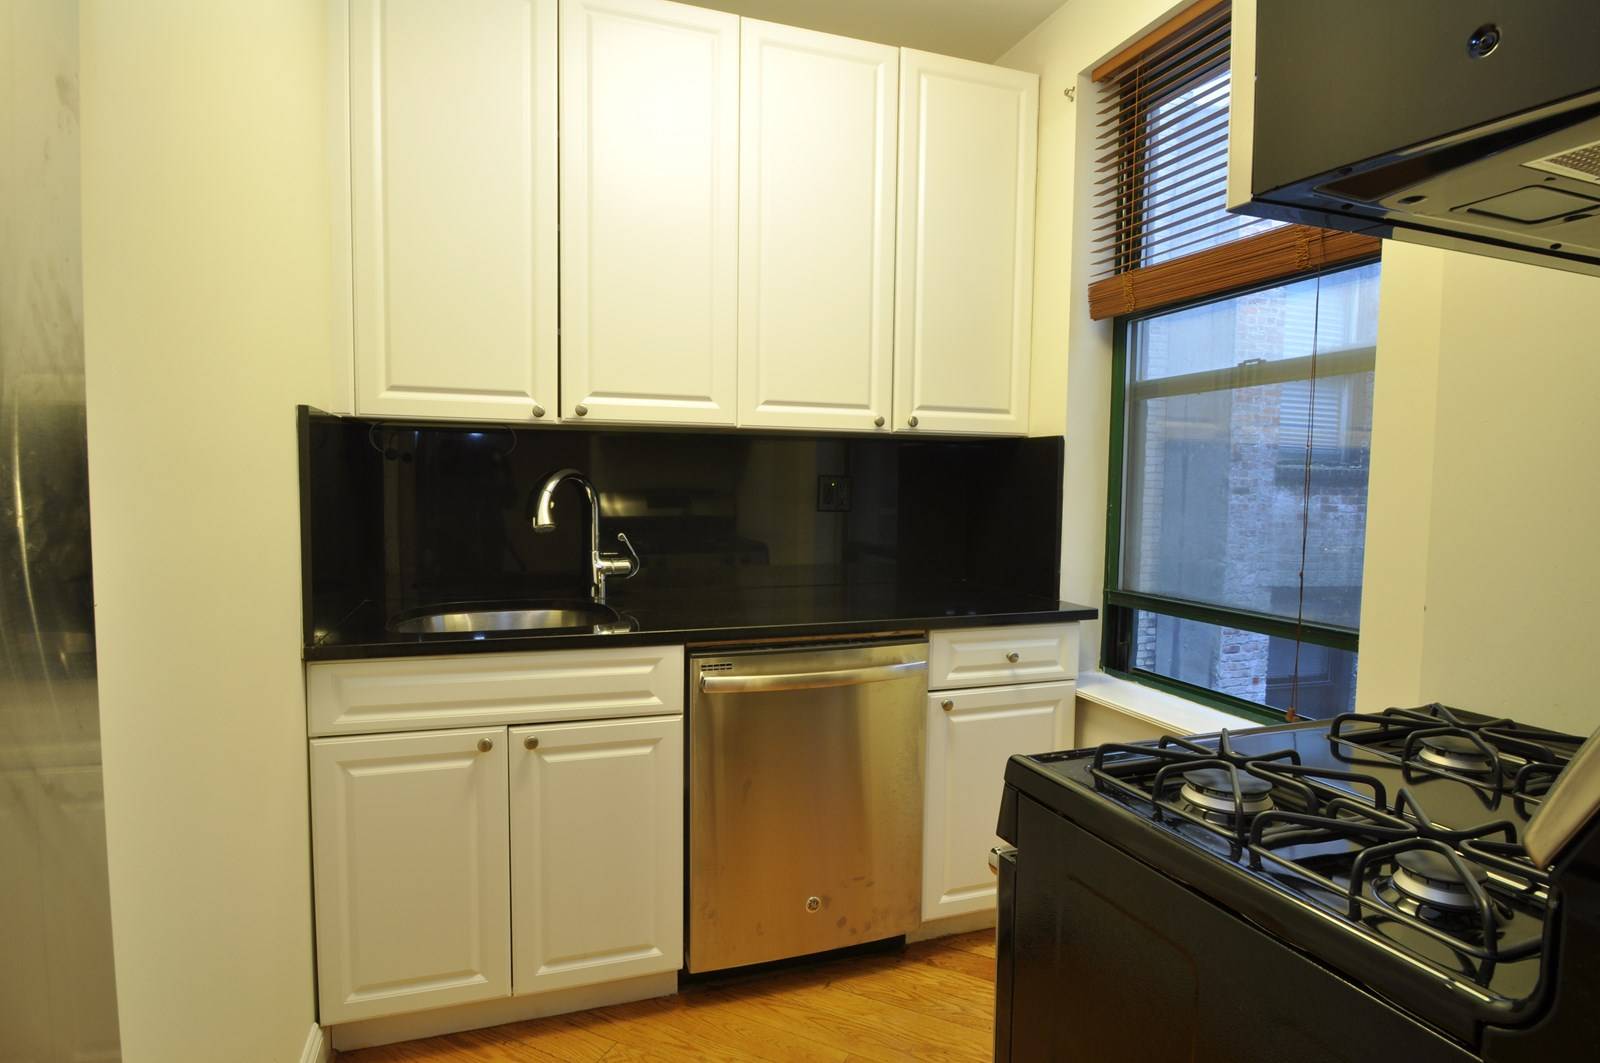 NEWLY RENOVATED THREE BEDROOM APARTMENT...UPPER EAST SIDE...NEAR Q AND 6 TRAINS